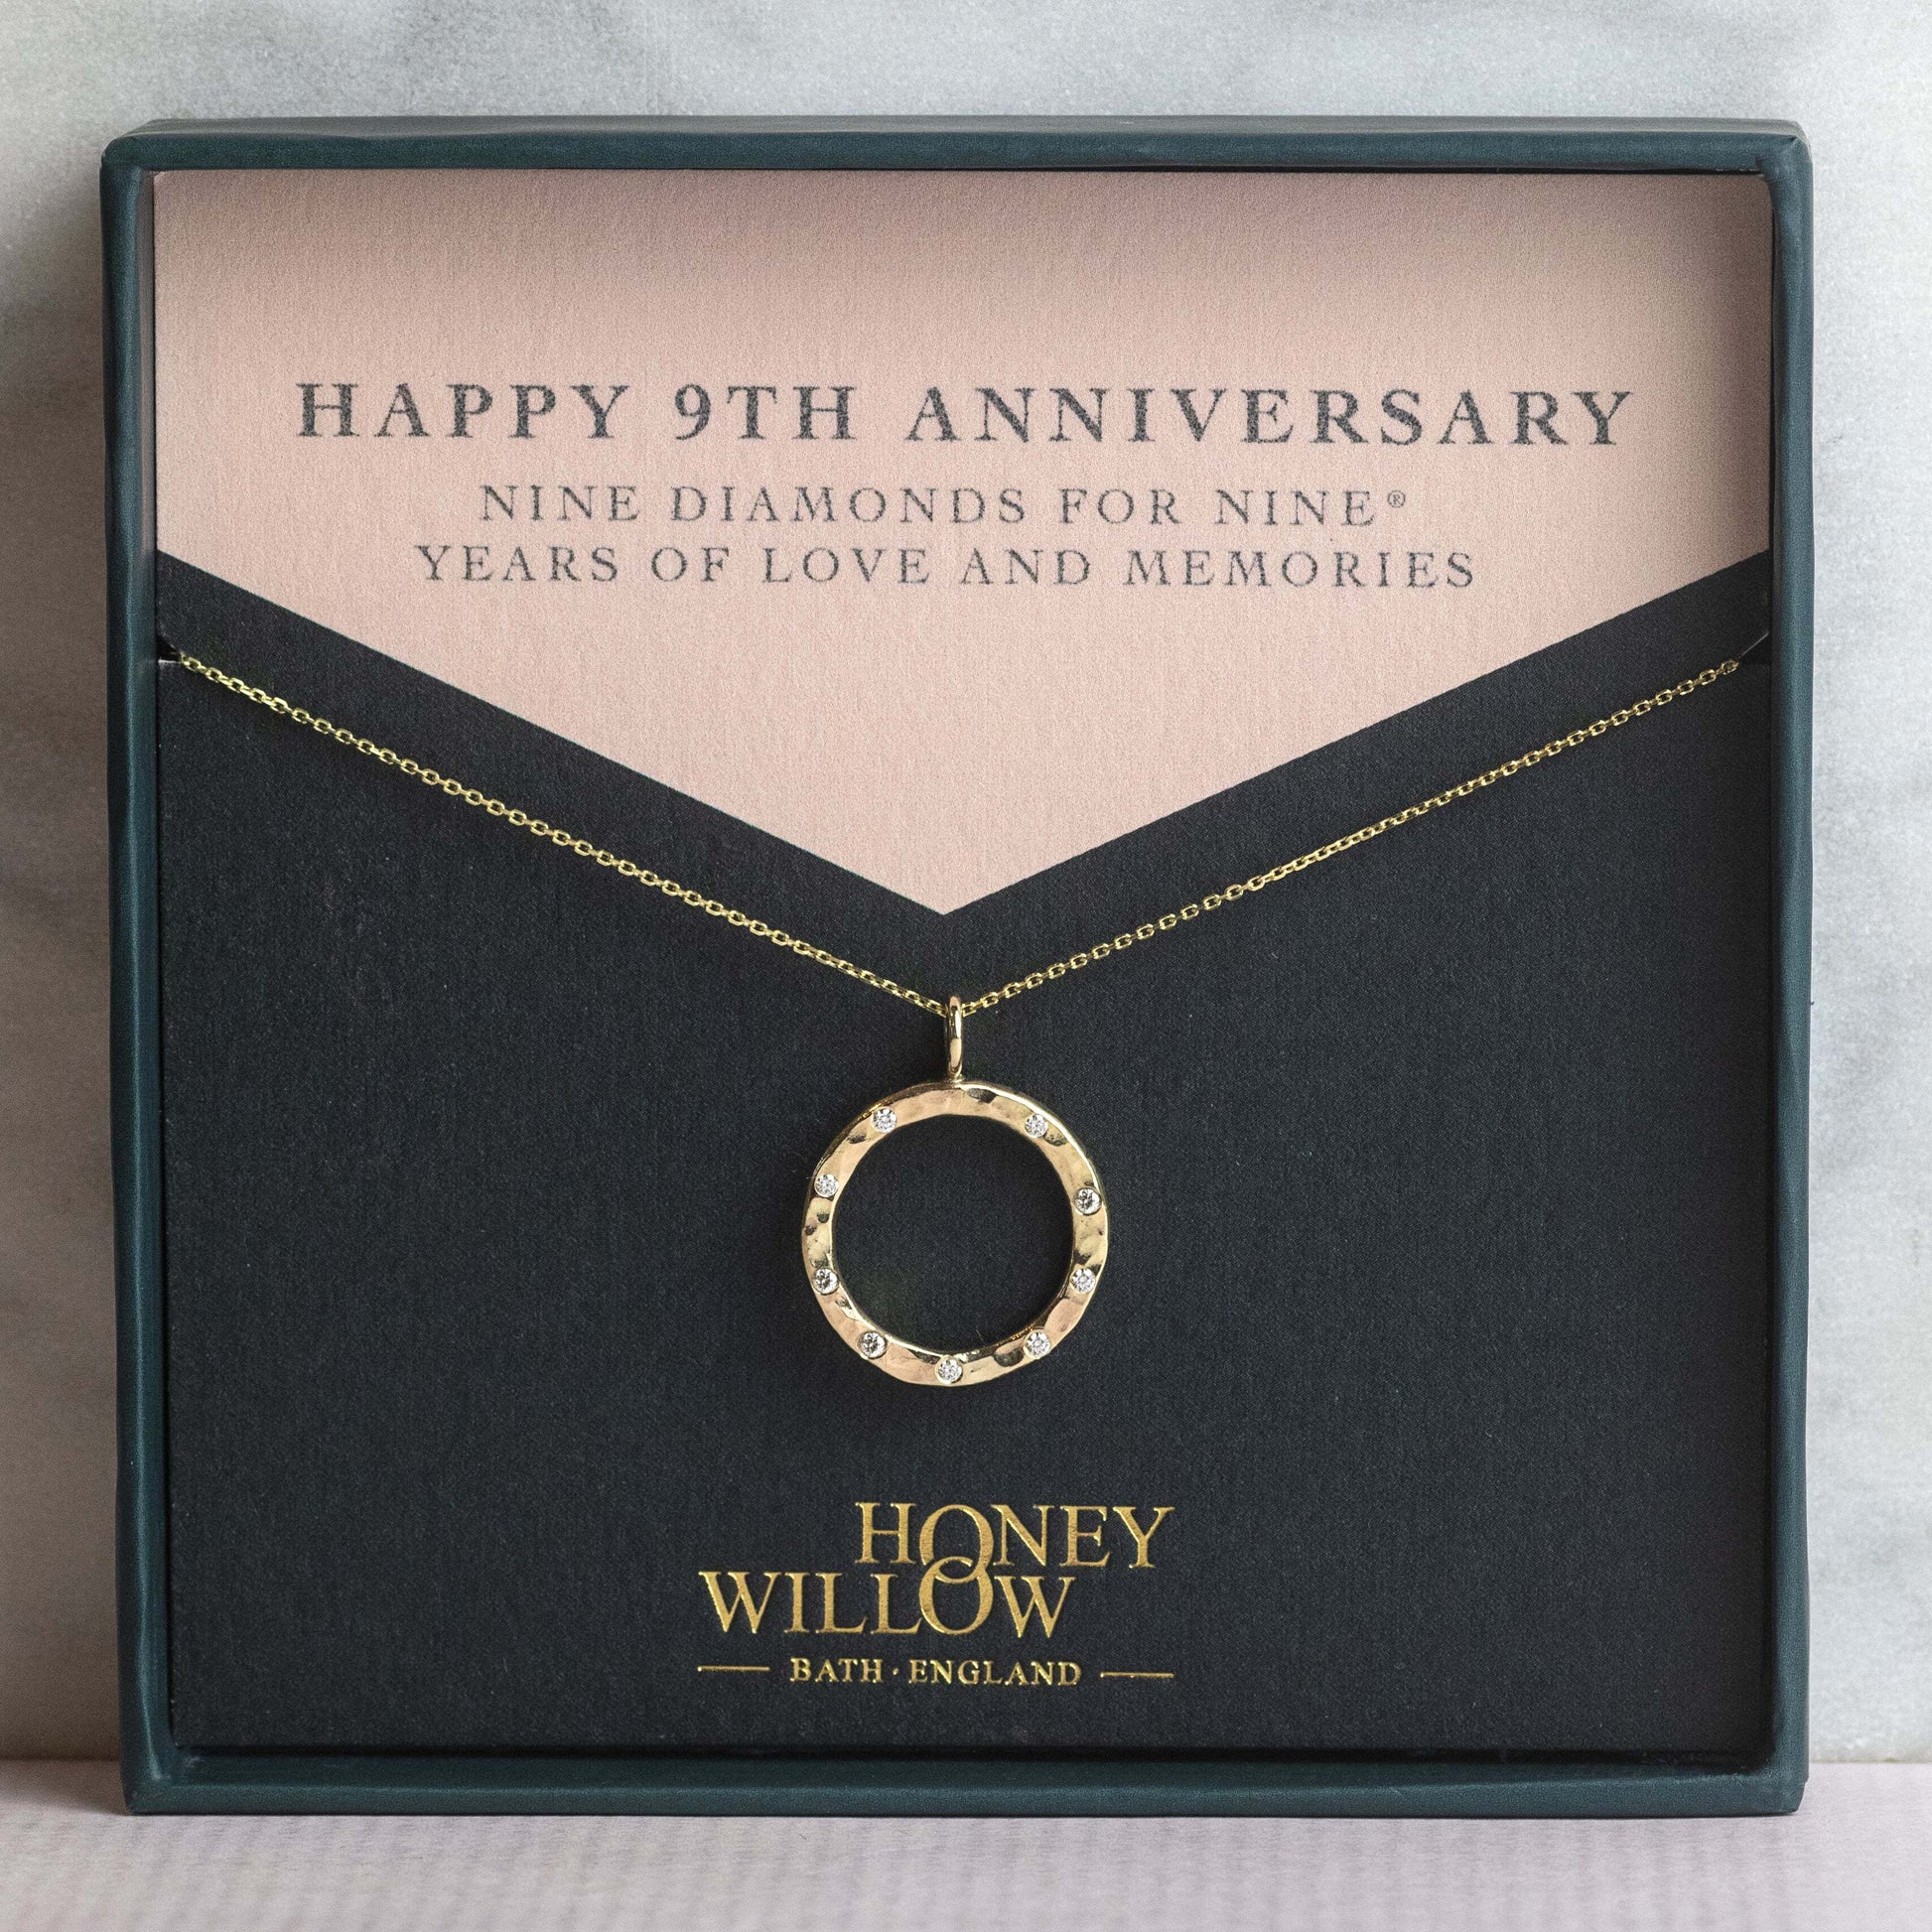 9th Anniversary Gift - 9kt Gold Diamond Halo Necklace - 9 Diamonds for 9® Years